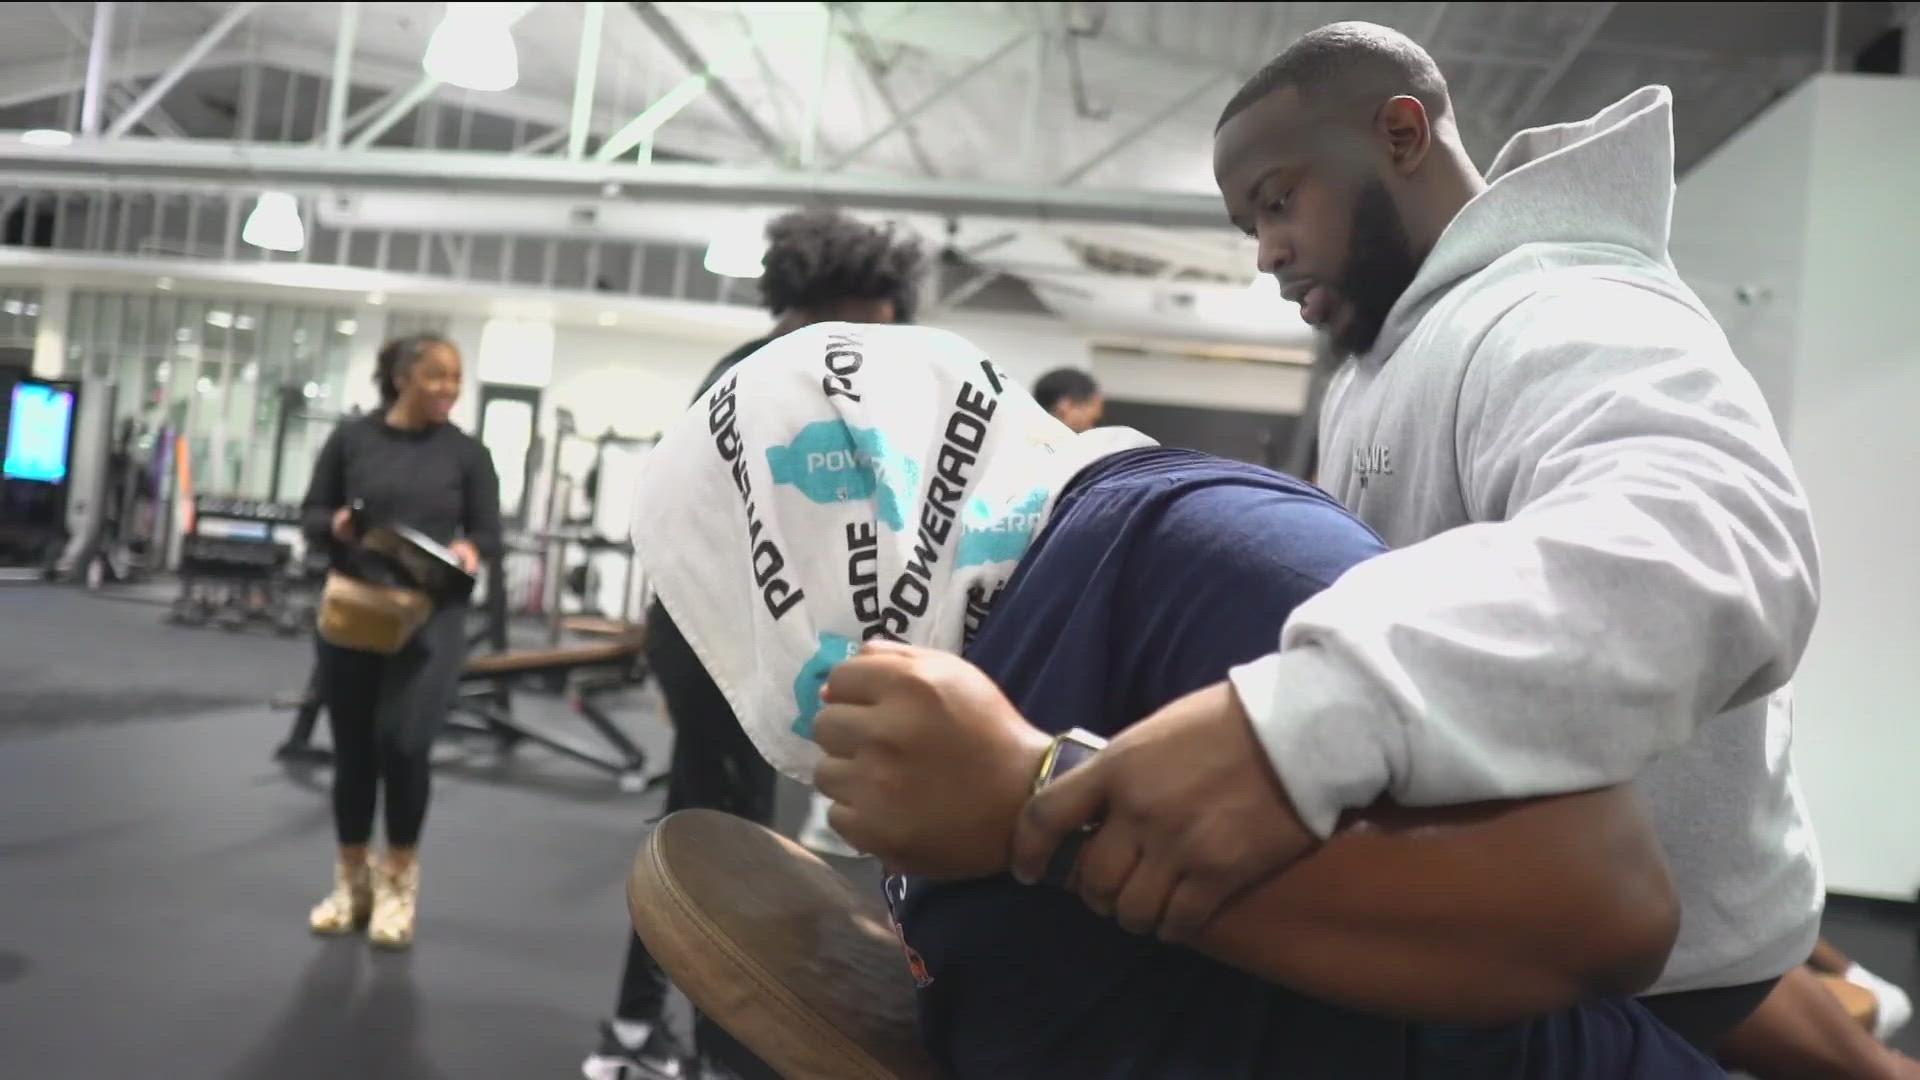 A group of NFL Draft hopefuls enlisted the help of Austin Strength Coach Jordan Bush to help push their bench press numbers to new heights.